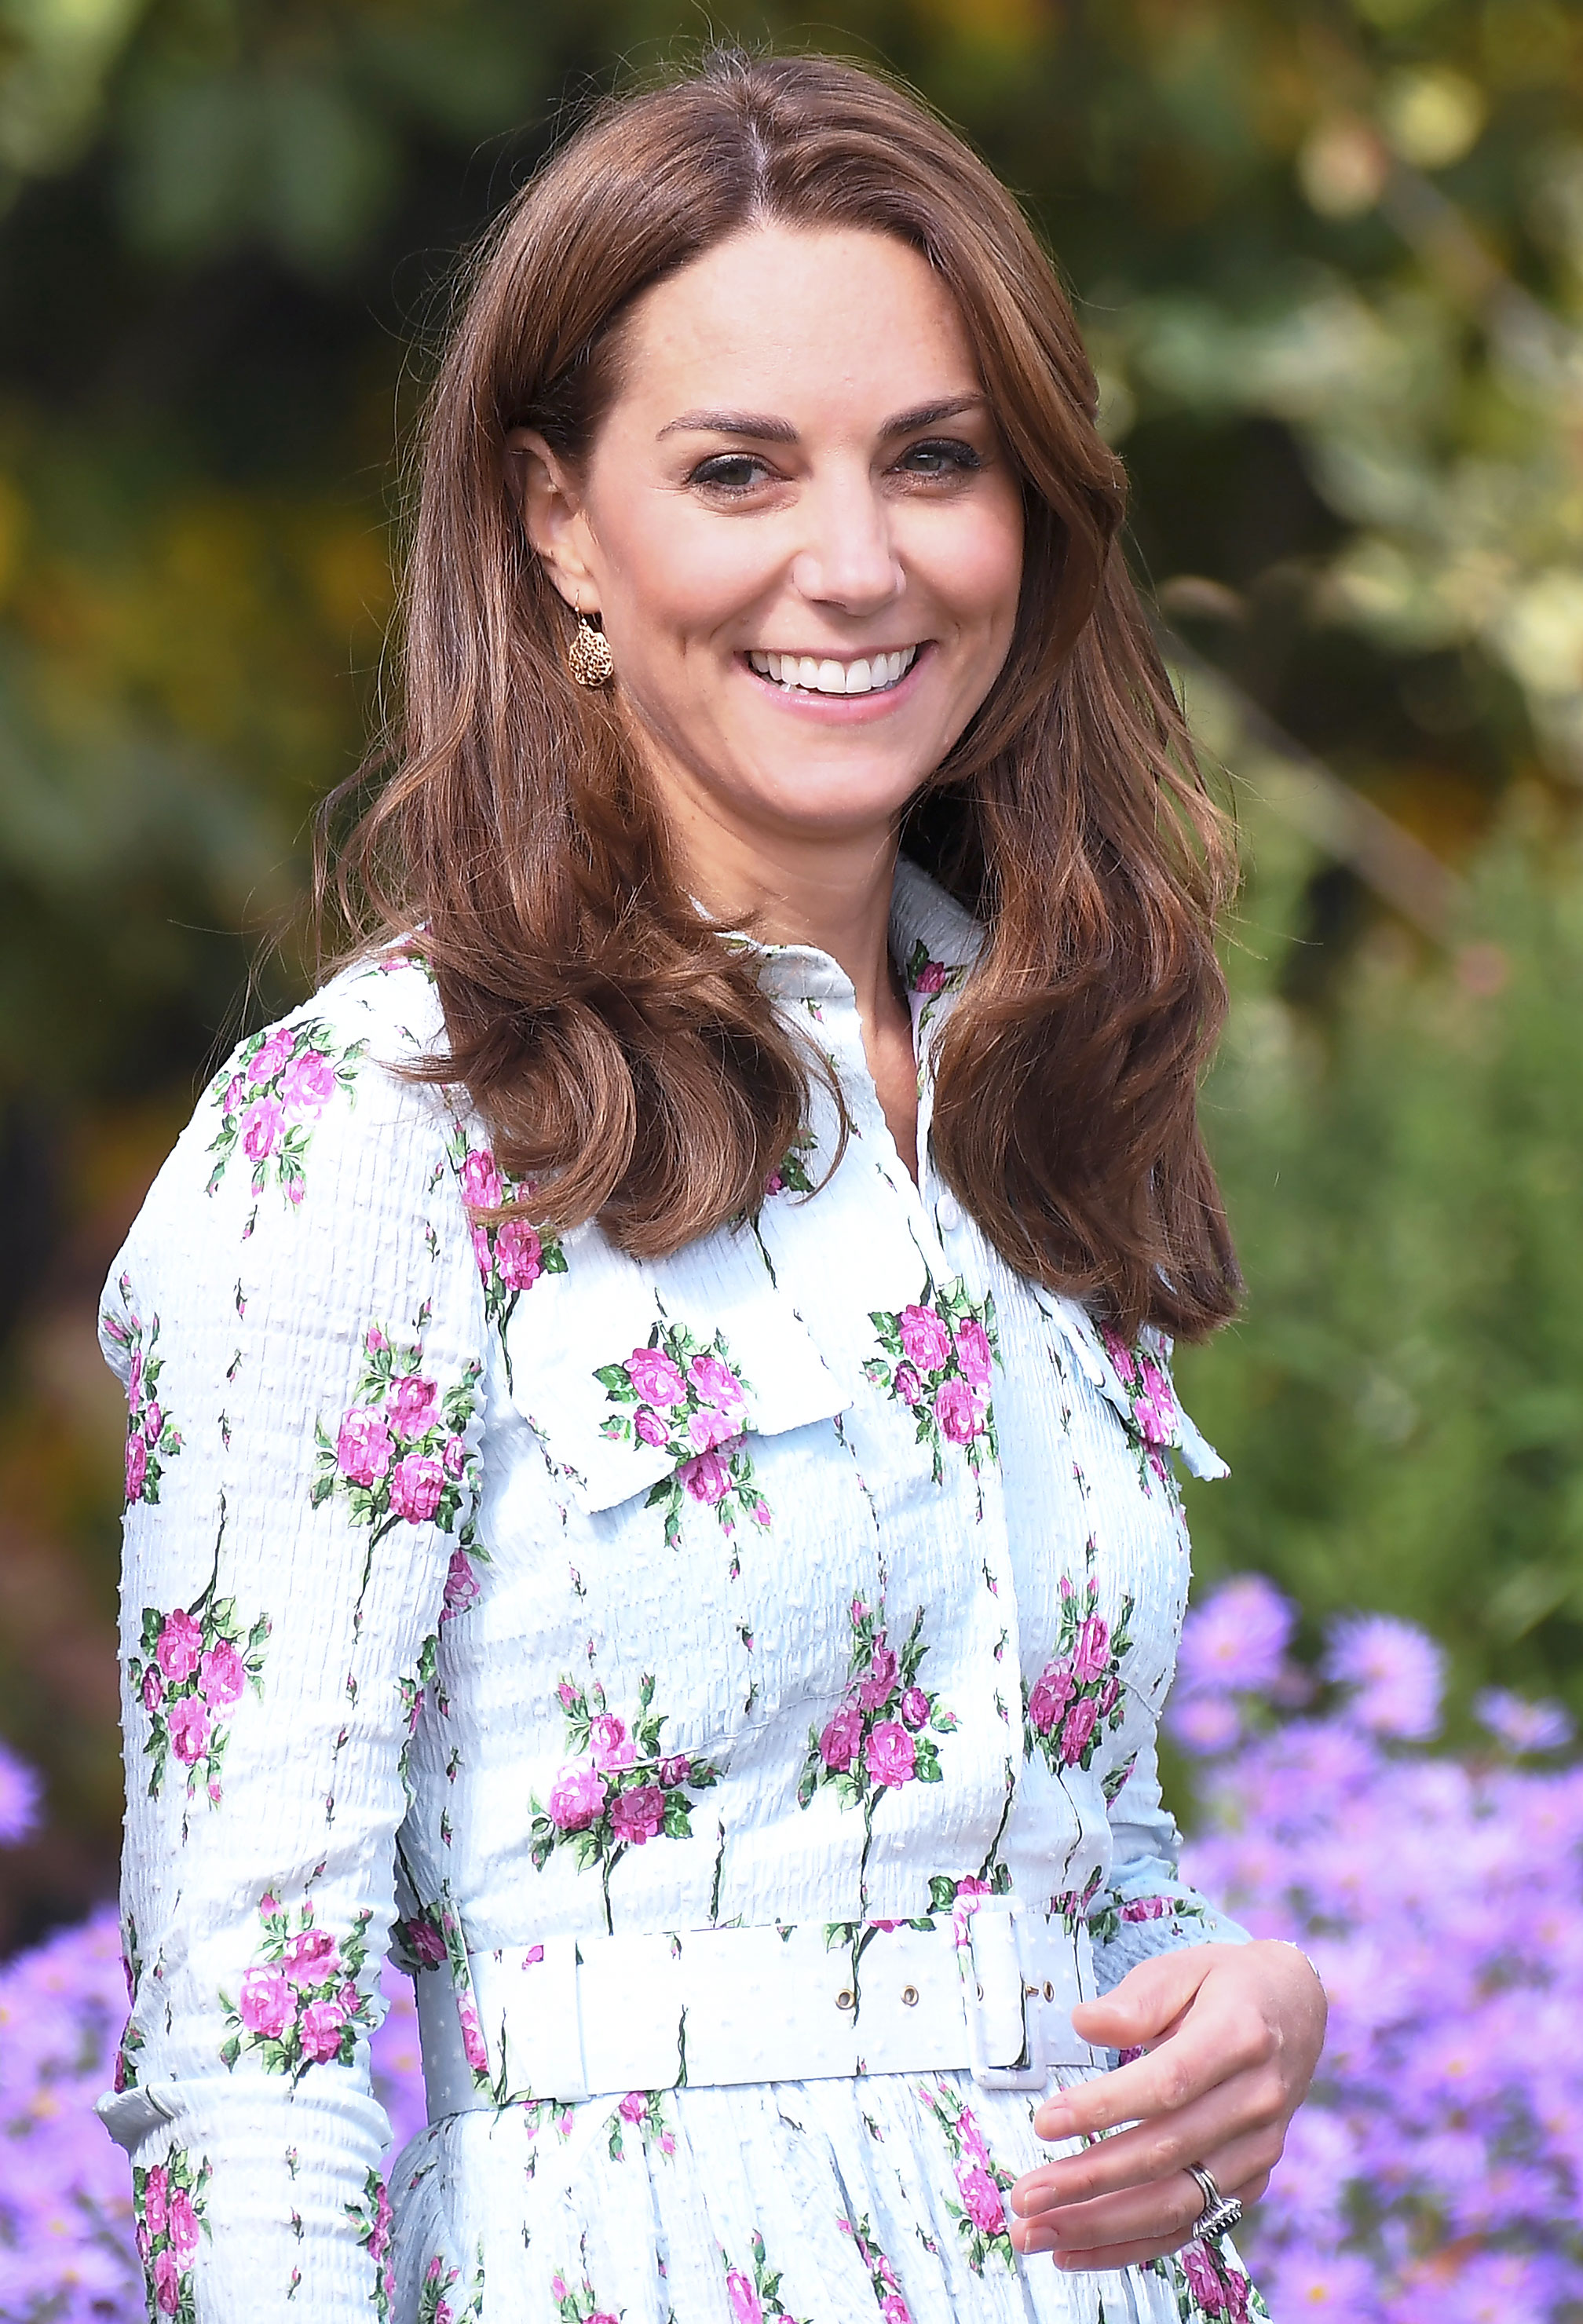 Kate Middleton Dyes Her Own Hair During COVID-19 Quarantine